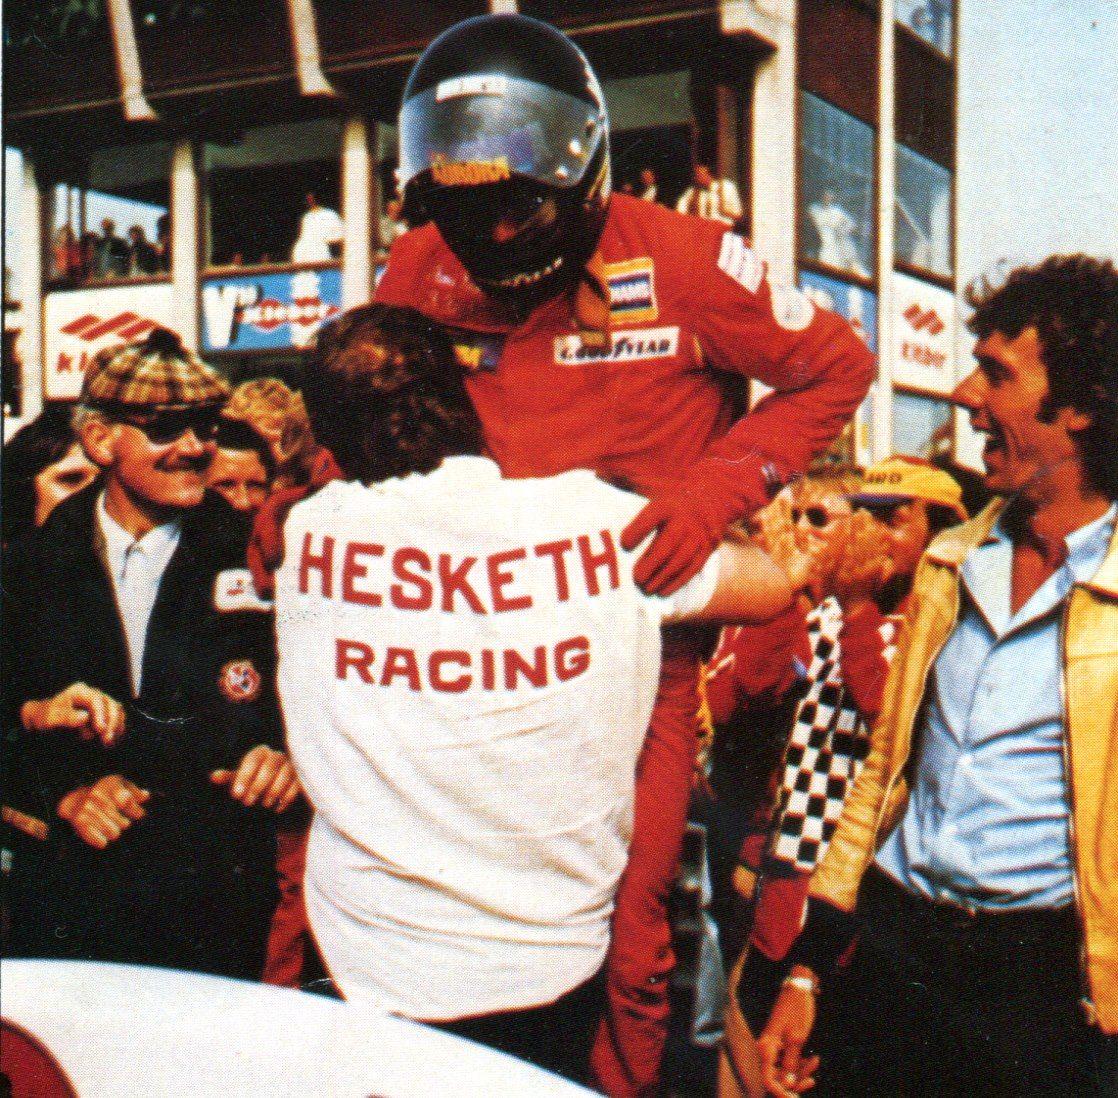 Lord Hesketh jubilant at James winning the Dutch GP in 1975.